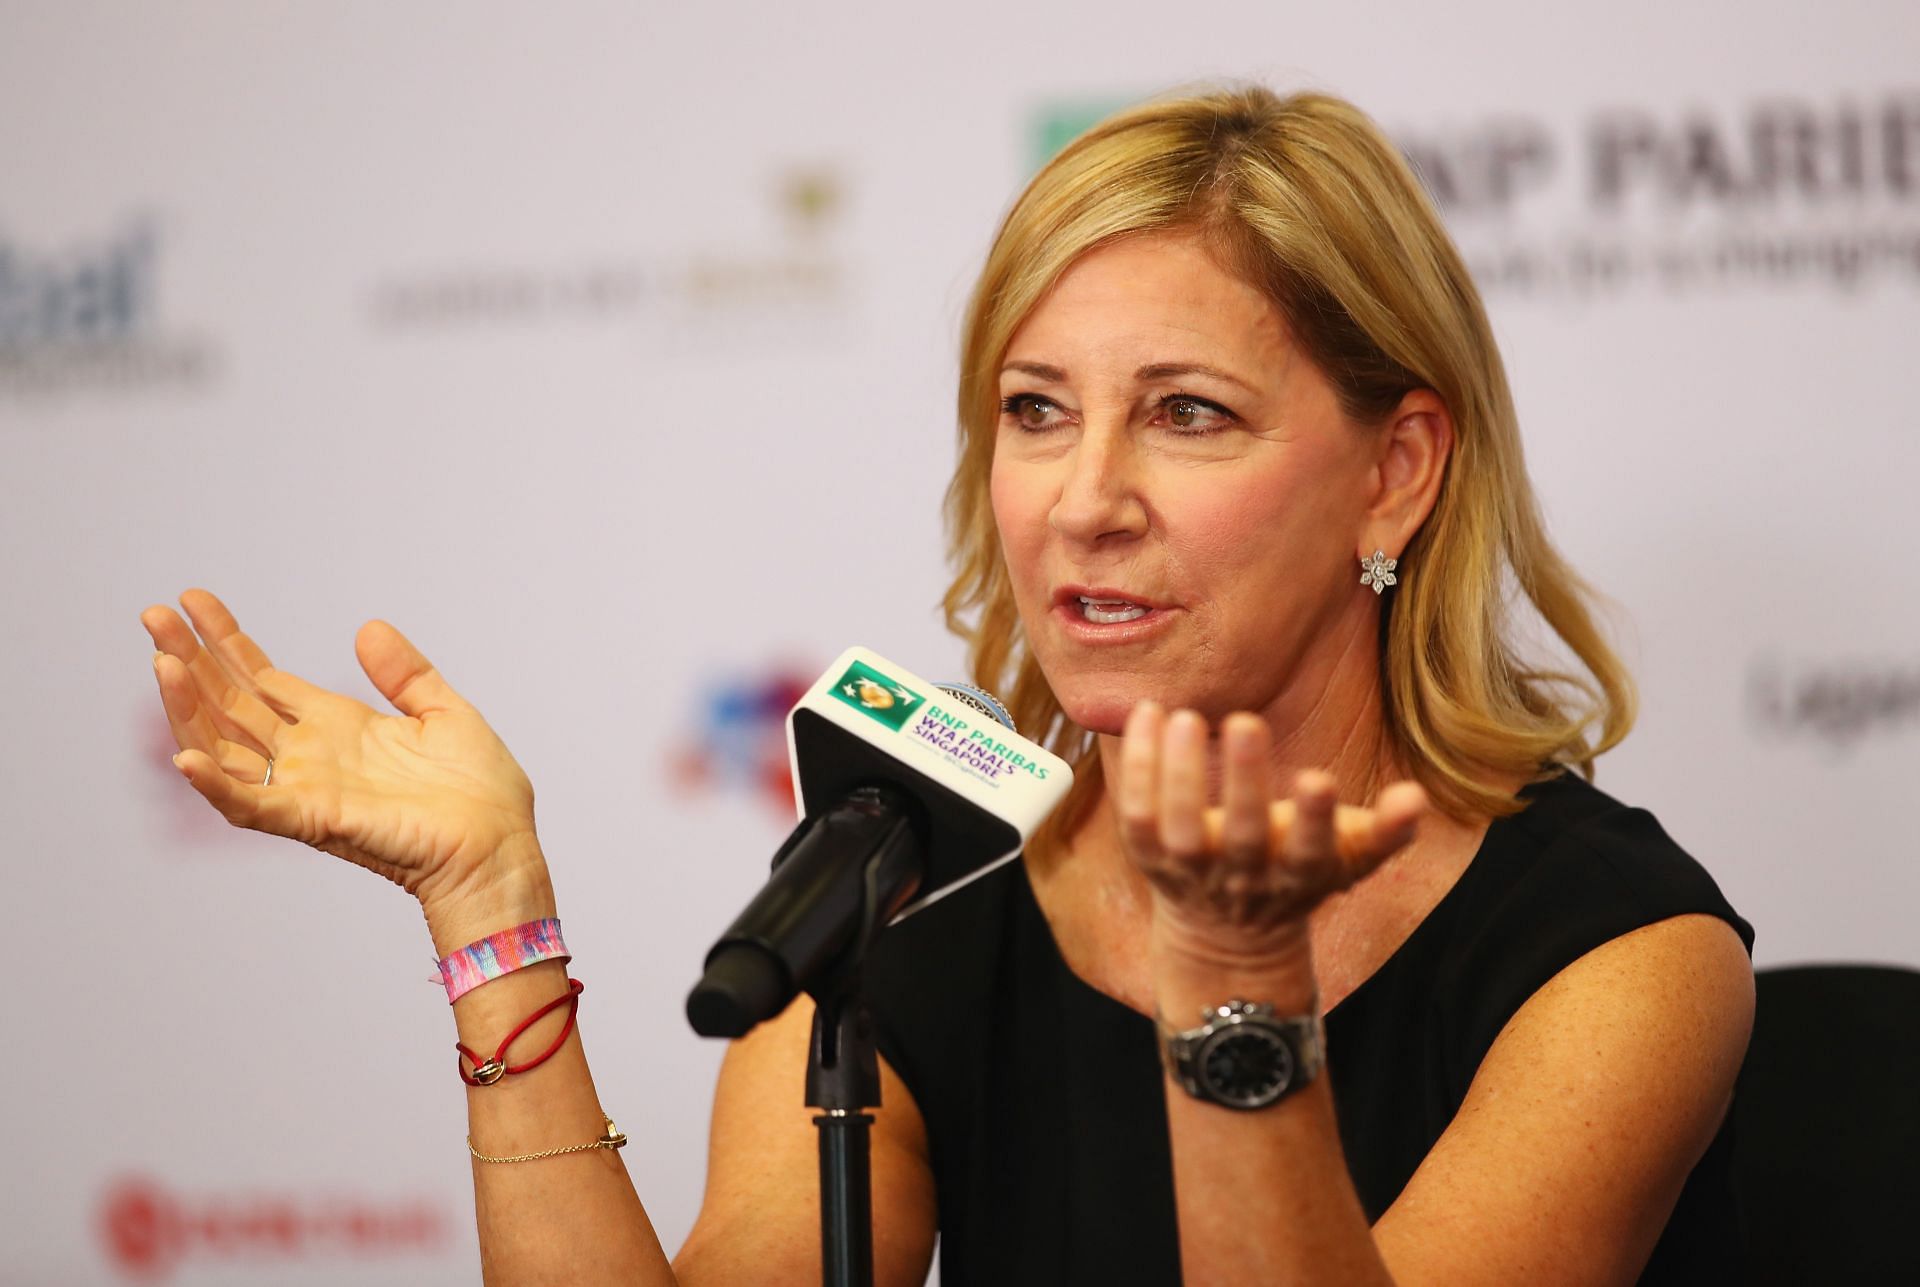 Chris Evert speaking to the press